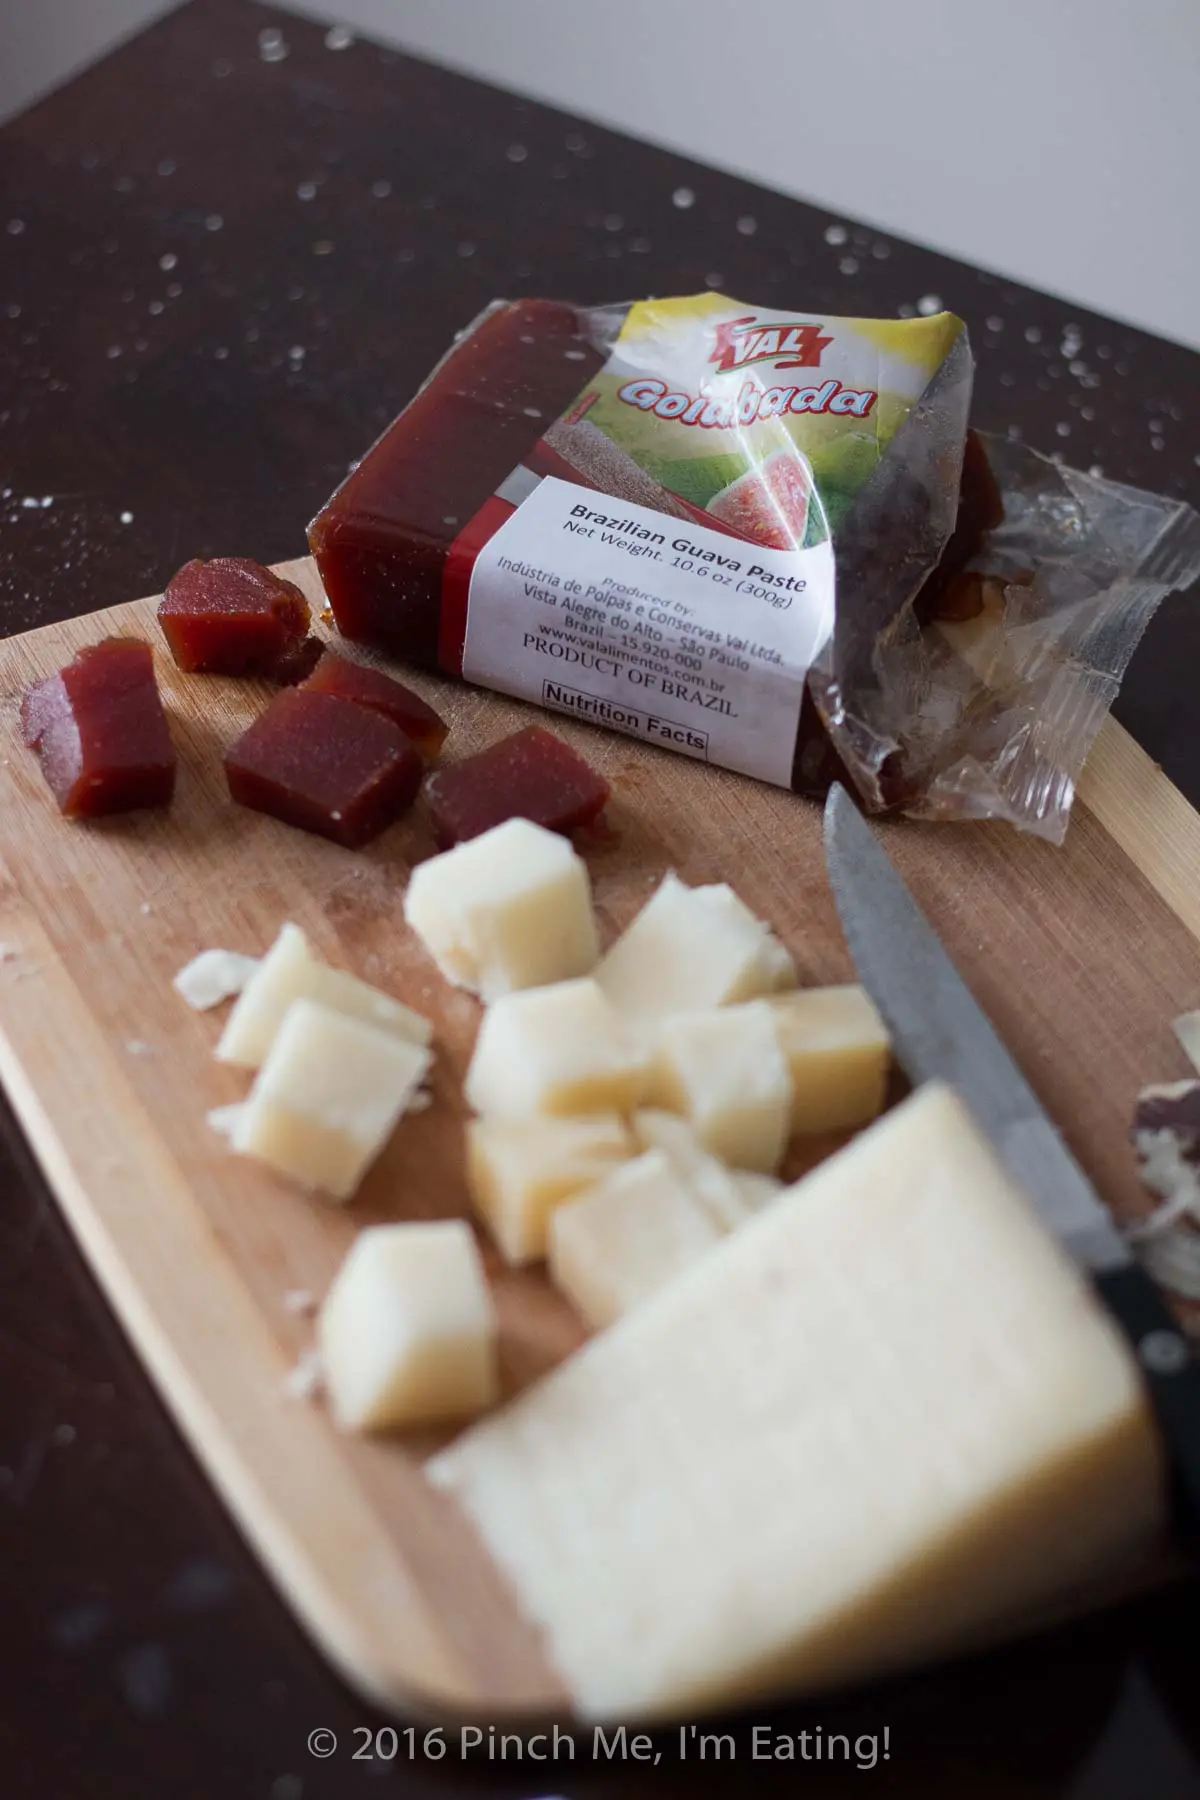 Diced guava paste and manchego cheese on a wooden cutting board.